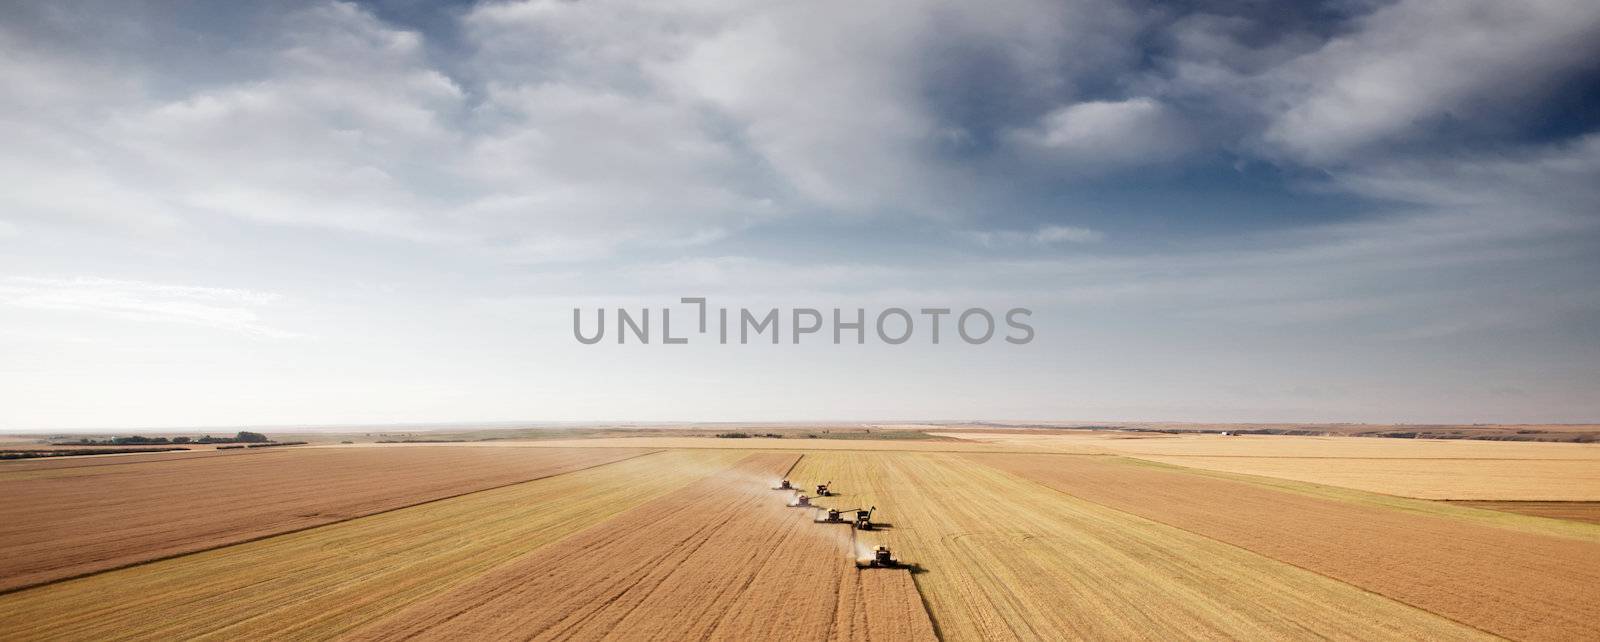 Panoramic landscape with four combines in a field on the open prairie